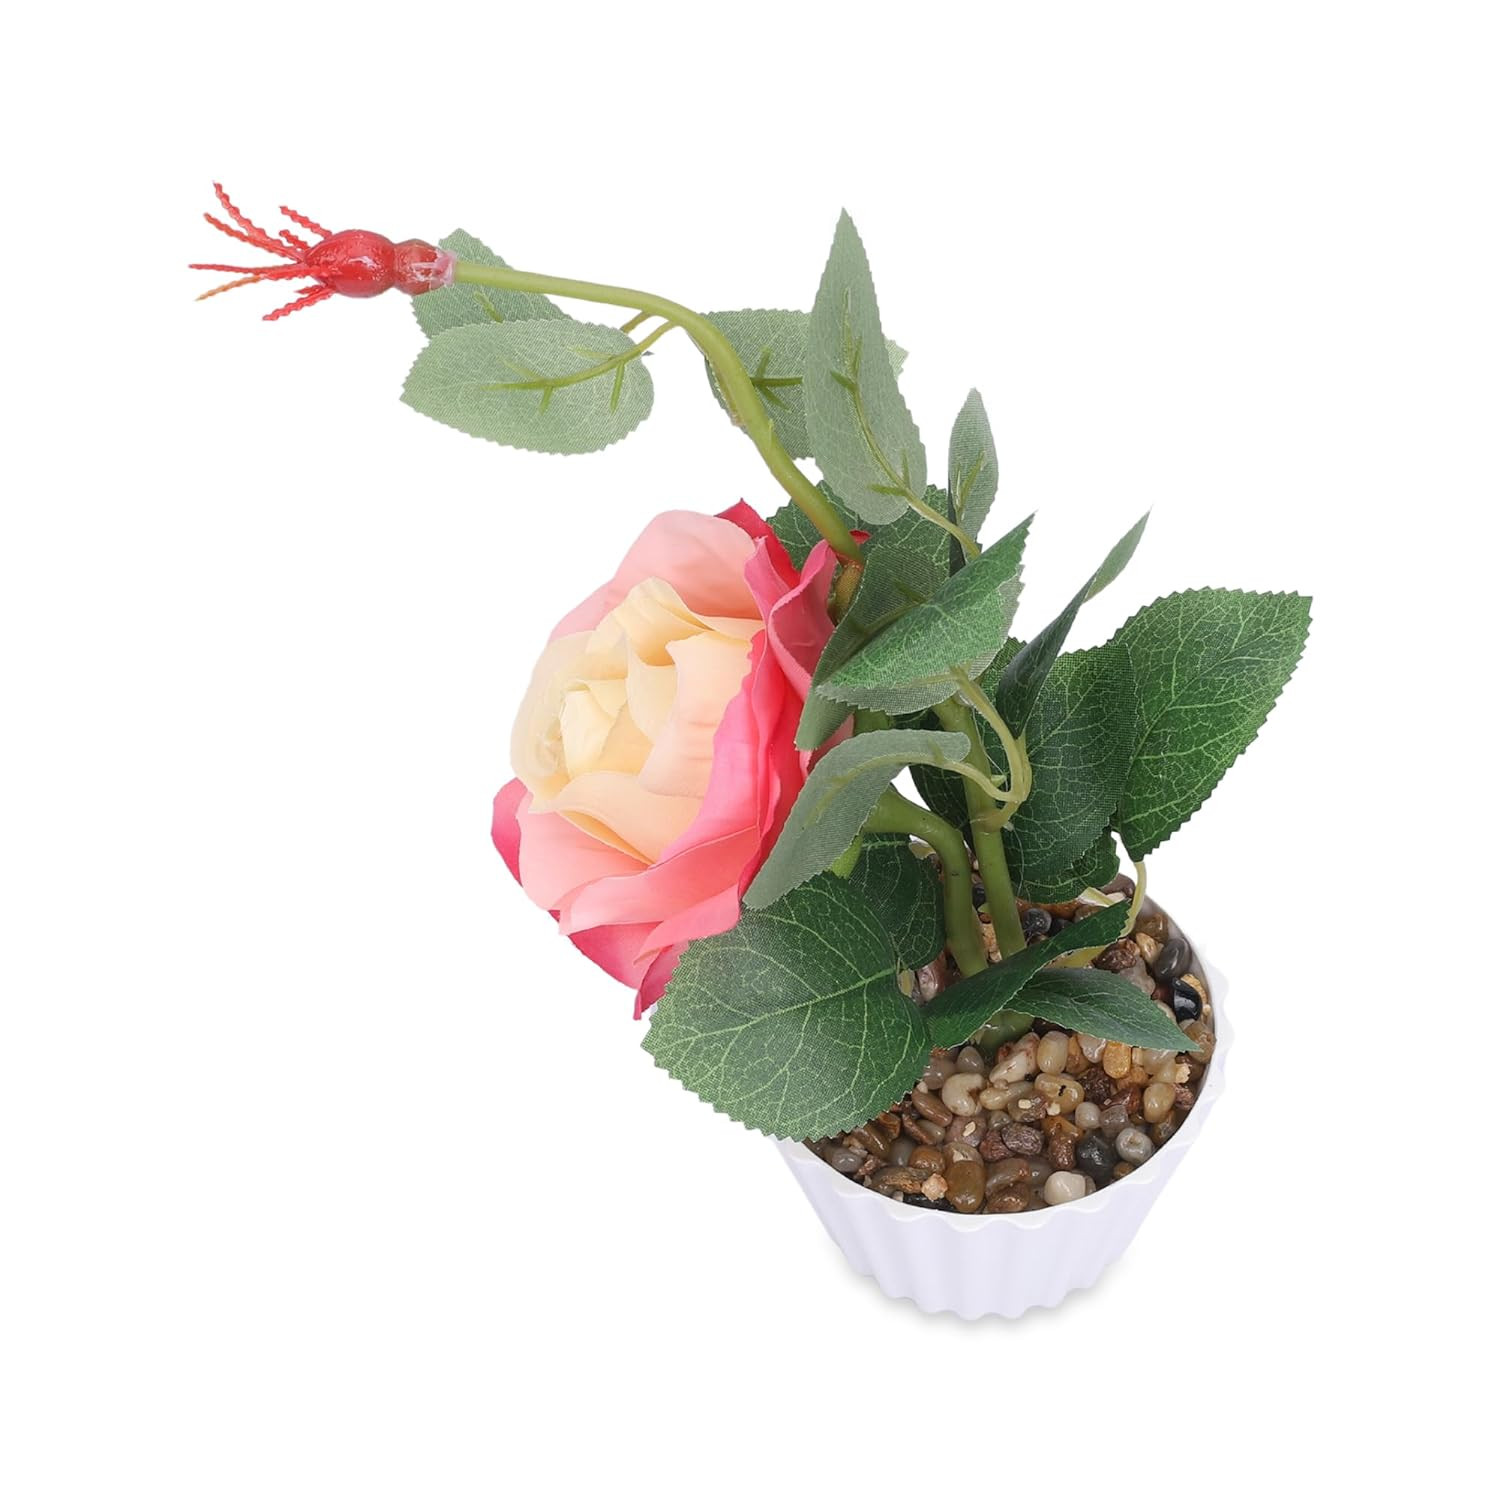 Kuber Industries Artificial Plants for Home DÃ©cor|Natural Looking Indoor Fake Plants with Pot|Artificial Flowers for Decoration (Peach)